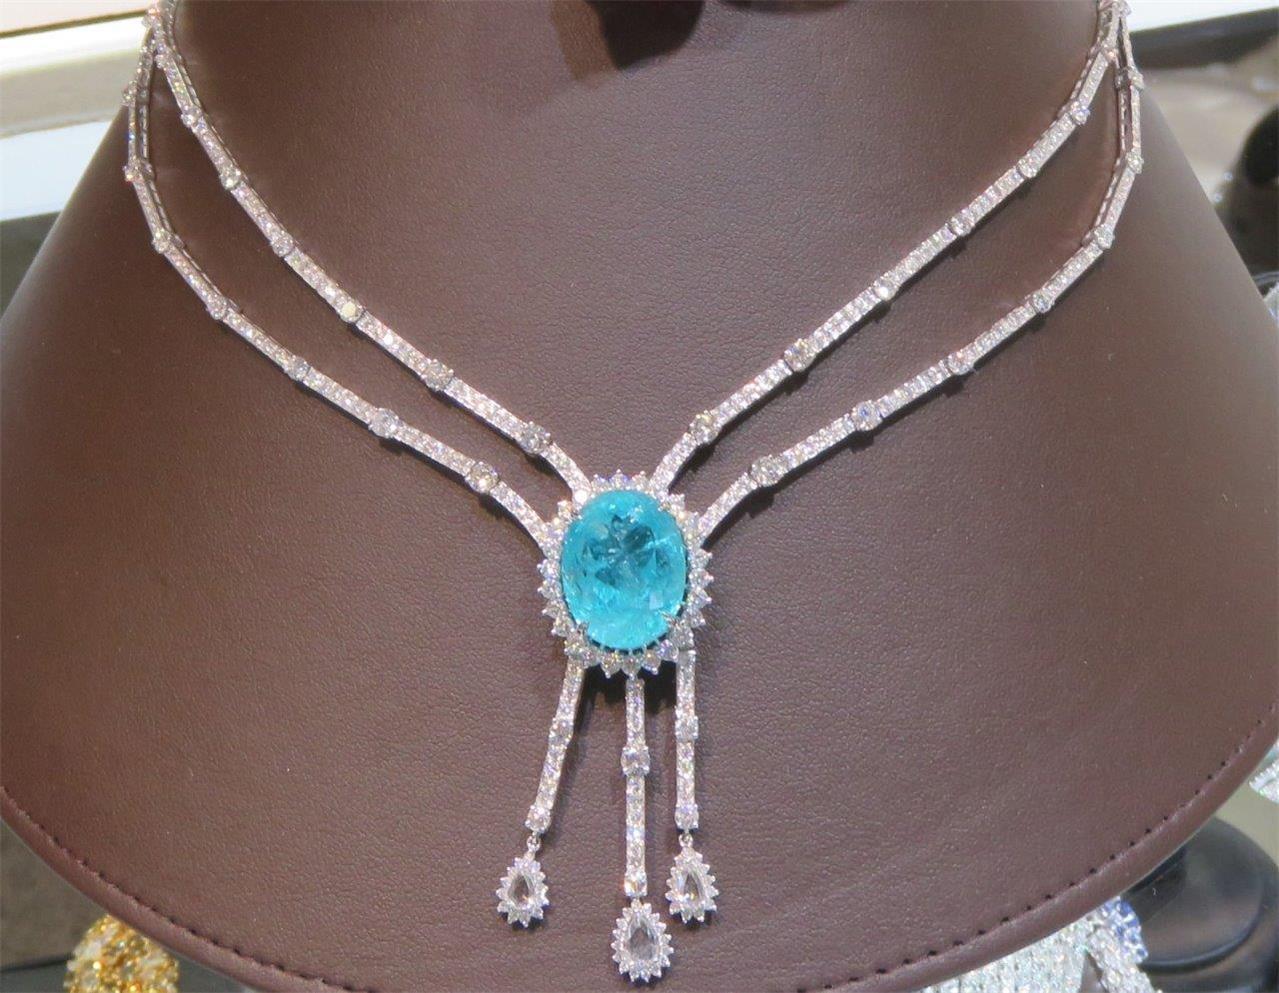 The Following Items we are offering is a Rare Important Gorgeous 18KT White Gold Winston Style Glistening Diamond and Paraiba Tourmaline Necklace!!!! Necklace features Outstanding Multi Shaped Glittering Extremely Rare Fancy Cut Mozambique Paraiba